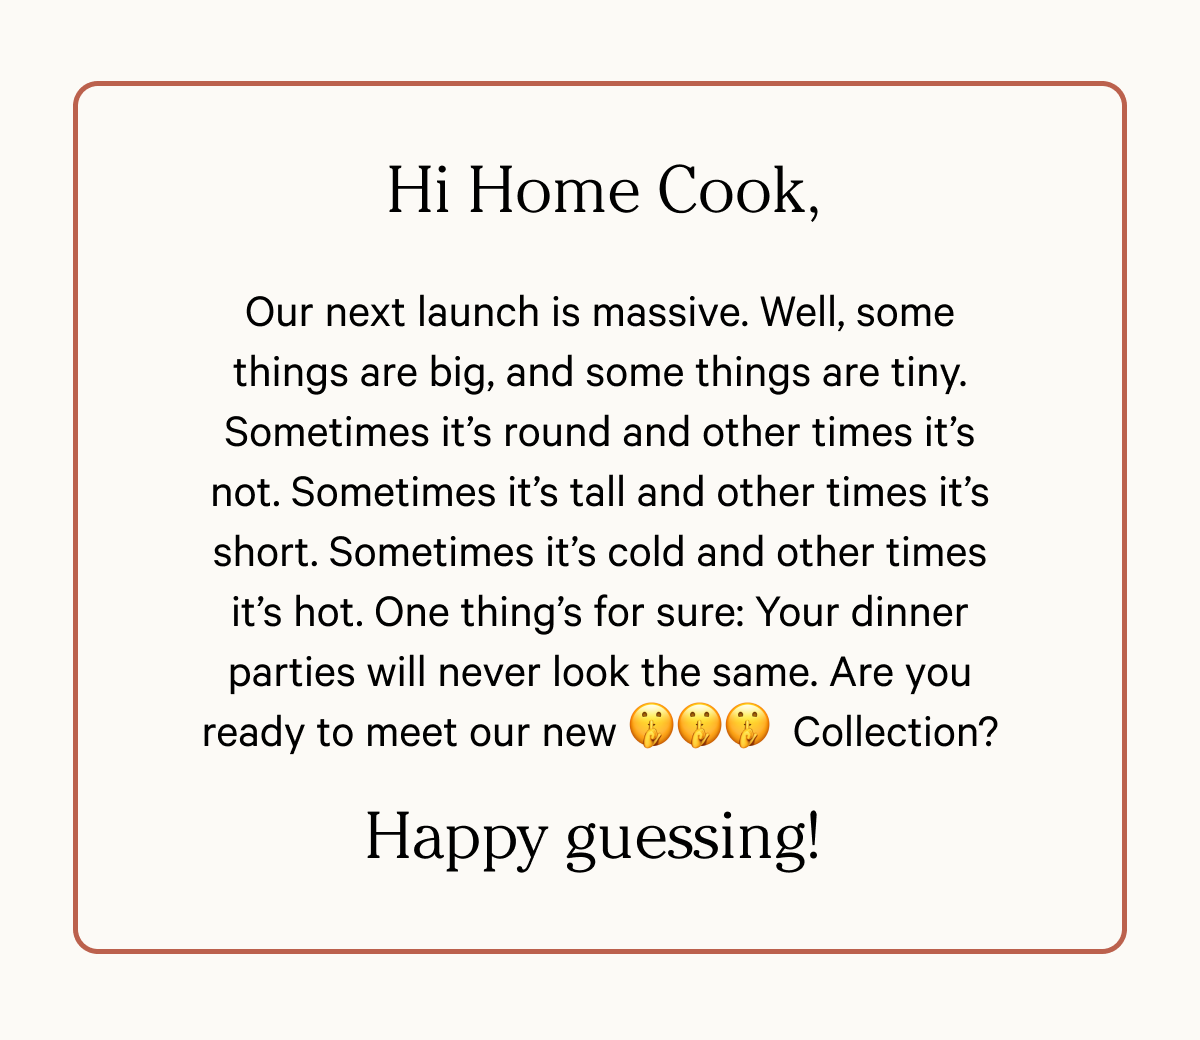 Hi Home Cook - Our next launch is massive. Well, some things are big, and some things are tiny. Sometimes it’s round and other times it’s not. Sometimes it’s tall and other times it’s short. Sometimes it’s cold and other times it’s hot. One thing’s for sure: Your dinner parties will never look the same. Are you ready to meet our new Collection? - Happy guessing!